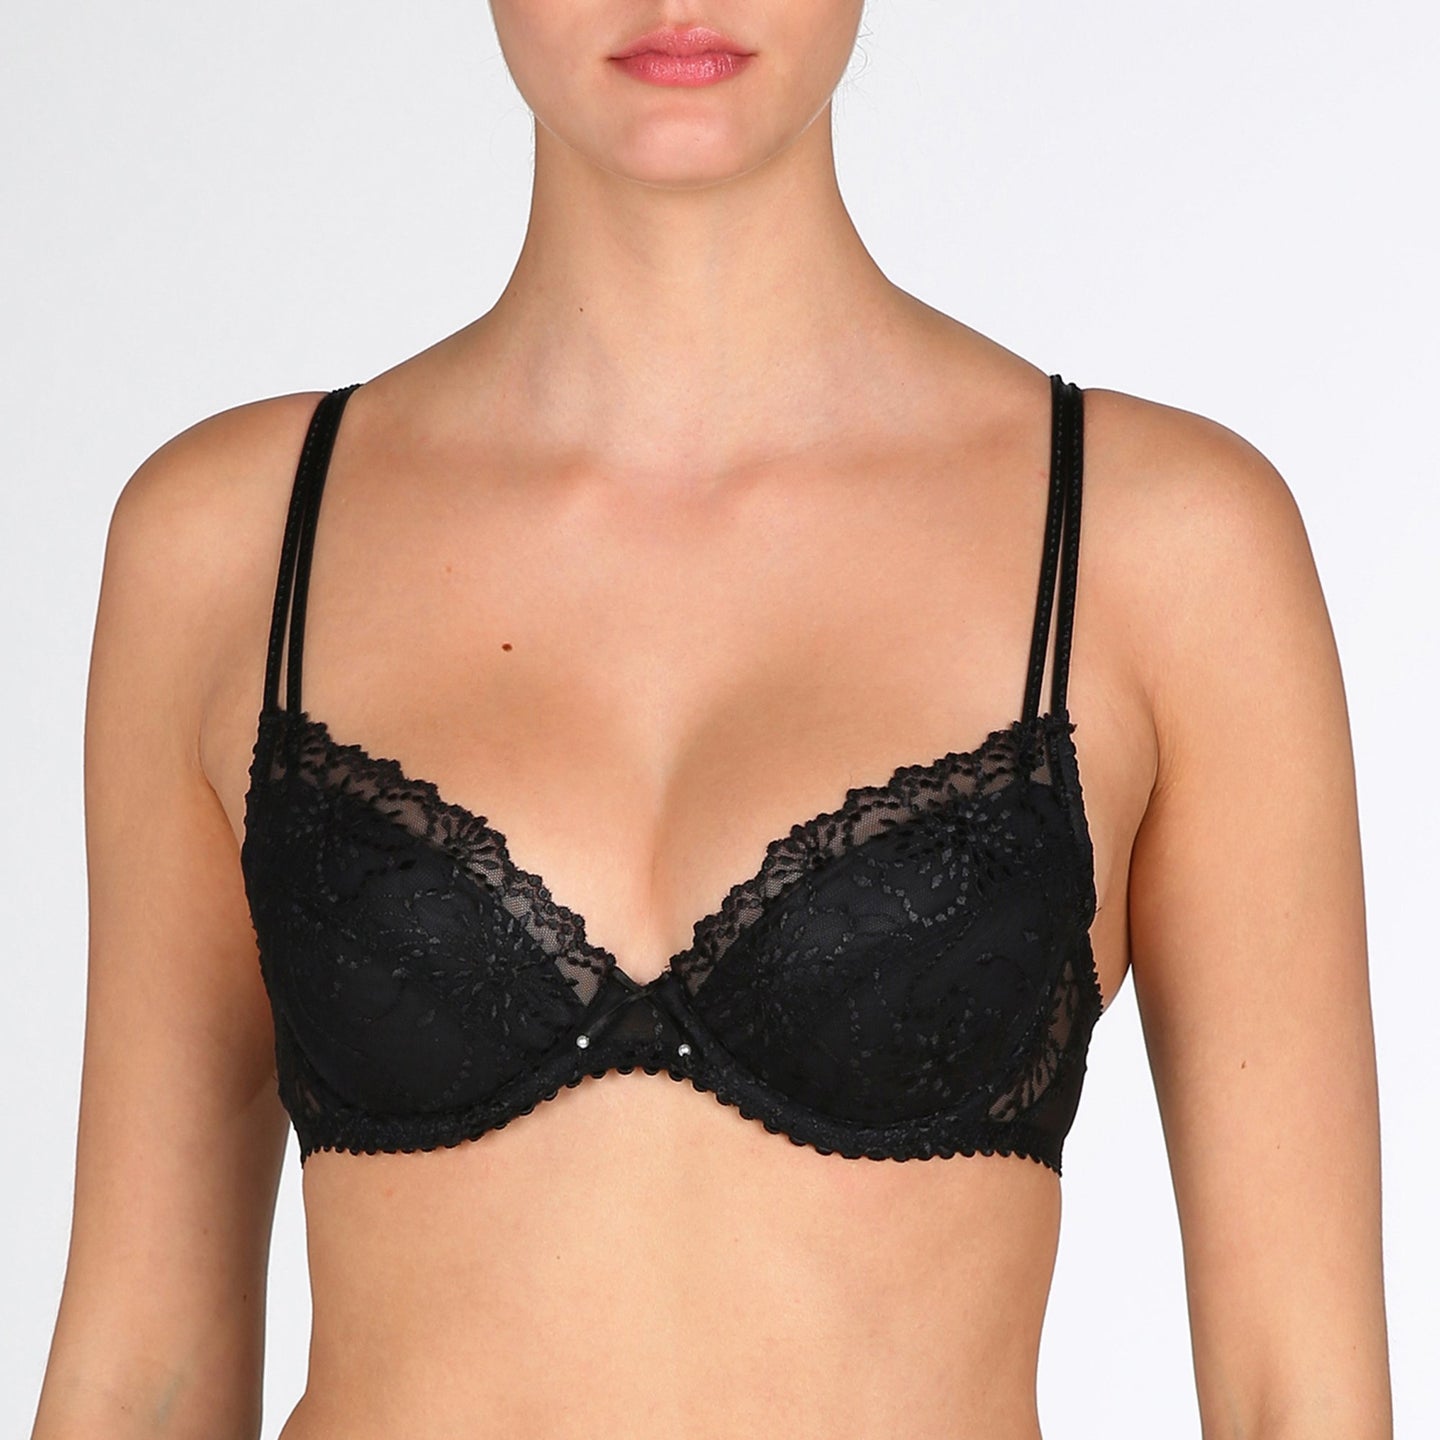 BEST SELLER! An all-lace plunge bra with removable pads to the C cup. This gorgeously shaped bra adds cleavage to any bust size. The double delicate straps give extra support without bulk. The removable pads (in A to C) allow the wearer to adjust the uplift. This bra lifts and centres the bust to give the ultimate cleavage. D - E cups are a formed plunge but without a pad. Fabric content: Polyamide: 54%, Polyester: 32%, Elastane: 14%. Black.